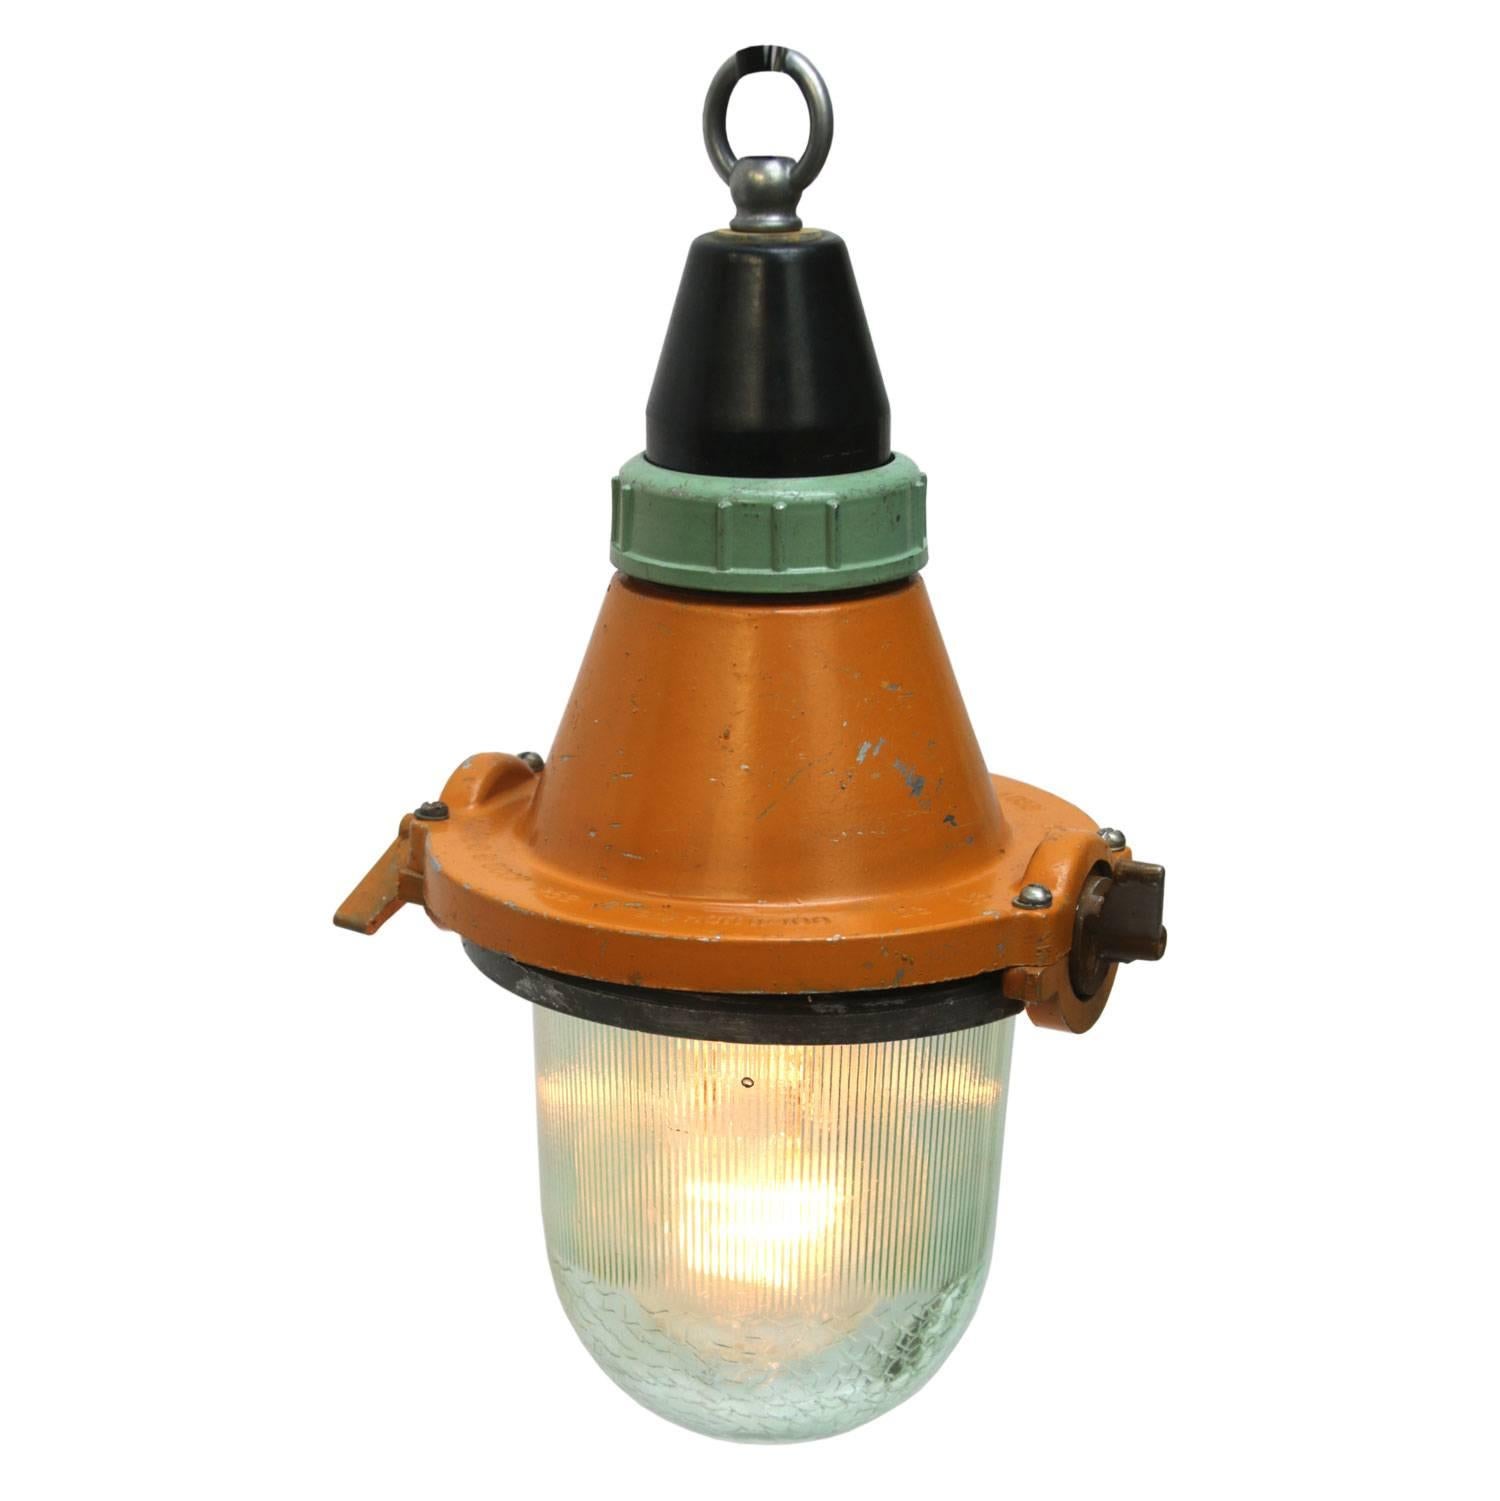 Small yellow Industrial light with Holophane glass. 

Weight: 1.5 kg / 3.3 lb

All lamps have been made suitable by international standards for incandescent light bulbs, energy-efficient and LED bulbs. E26/E27 bulb holders and new wiring are CE